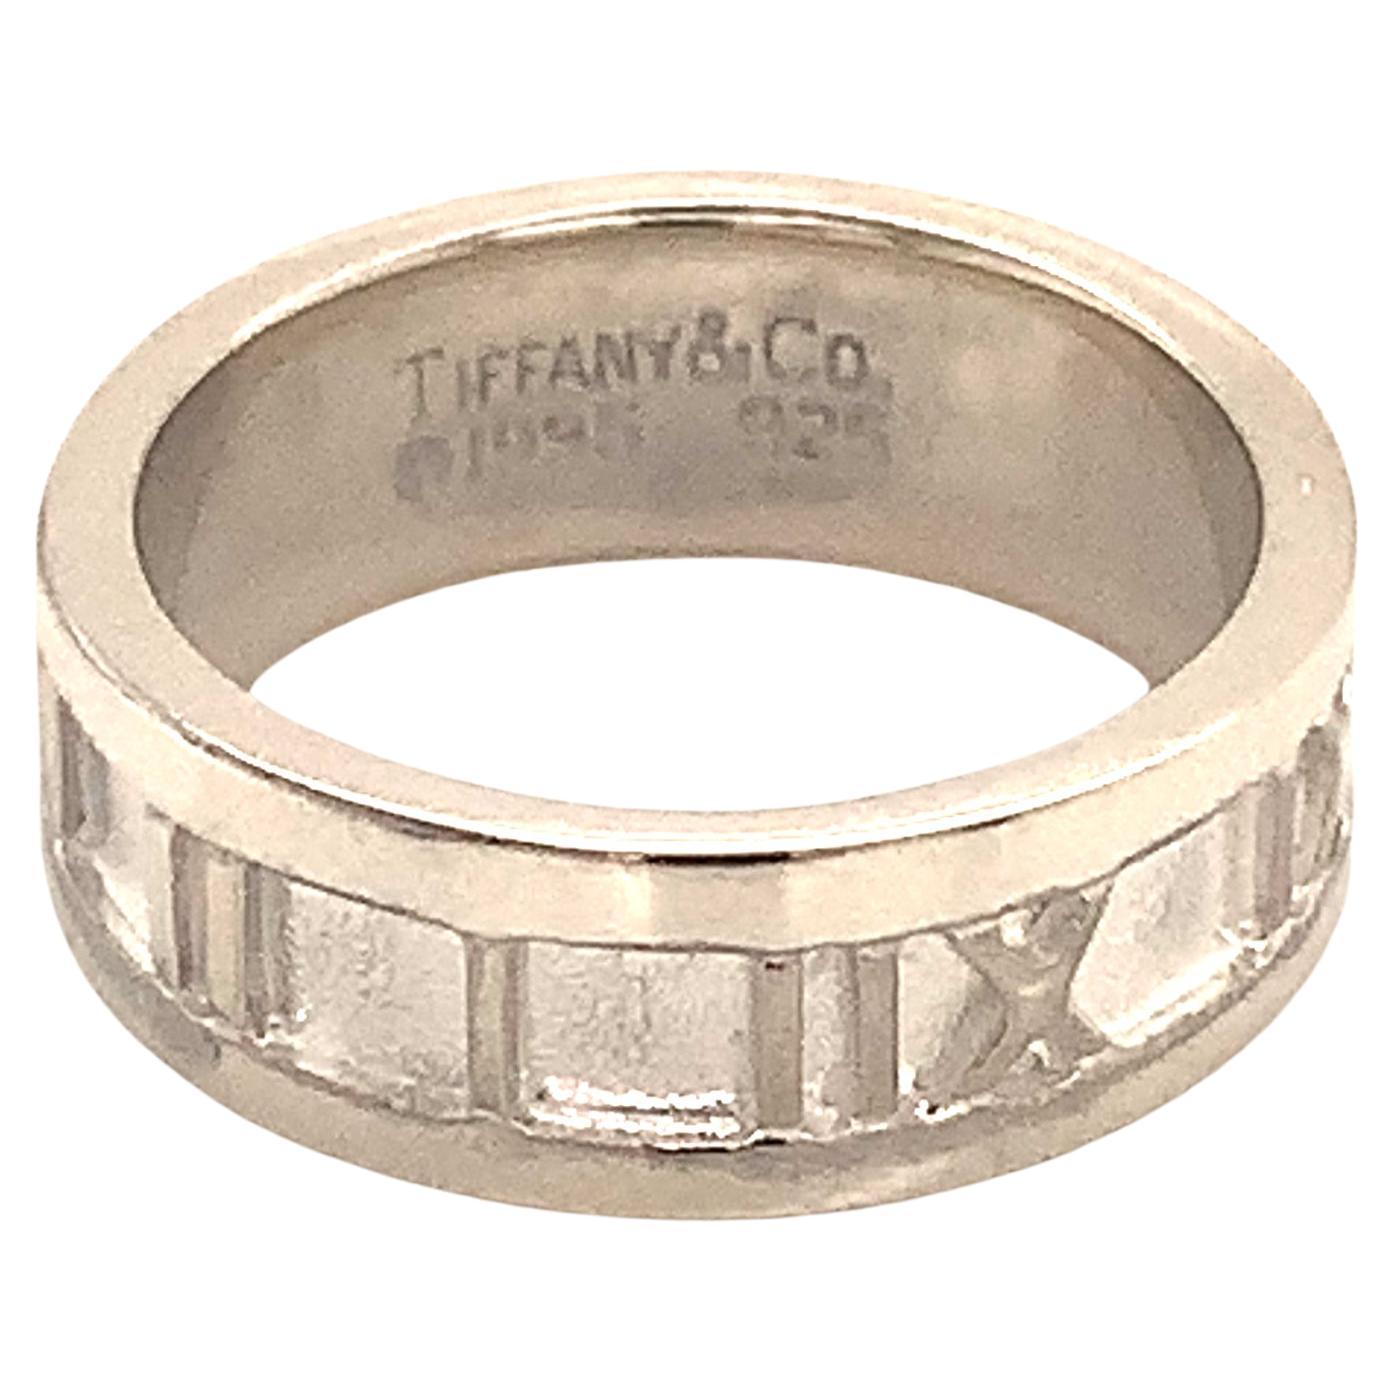 Tiffany & Co. Estate Ring Sterling Silver 4.2 Grams For Sale